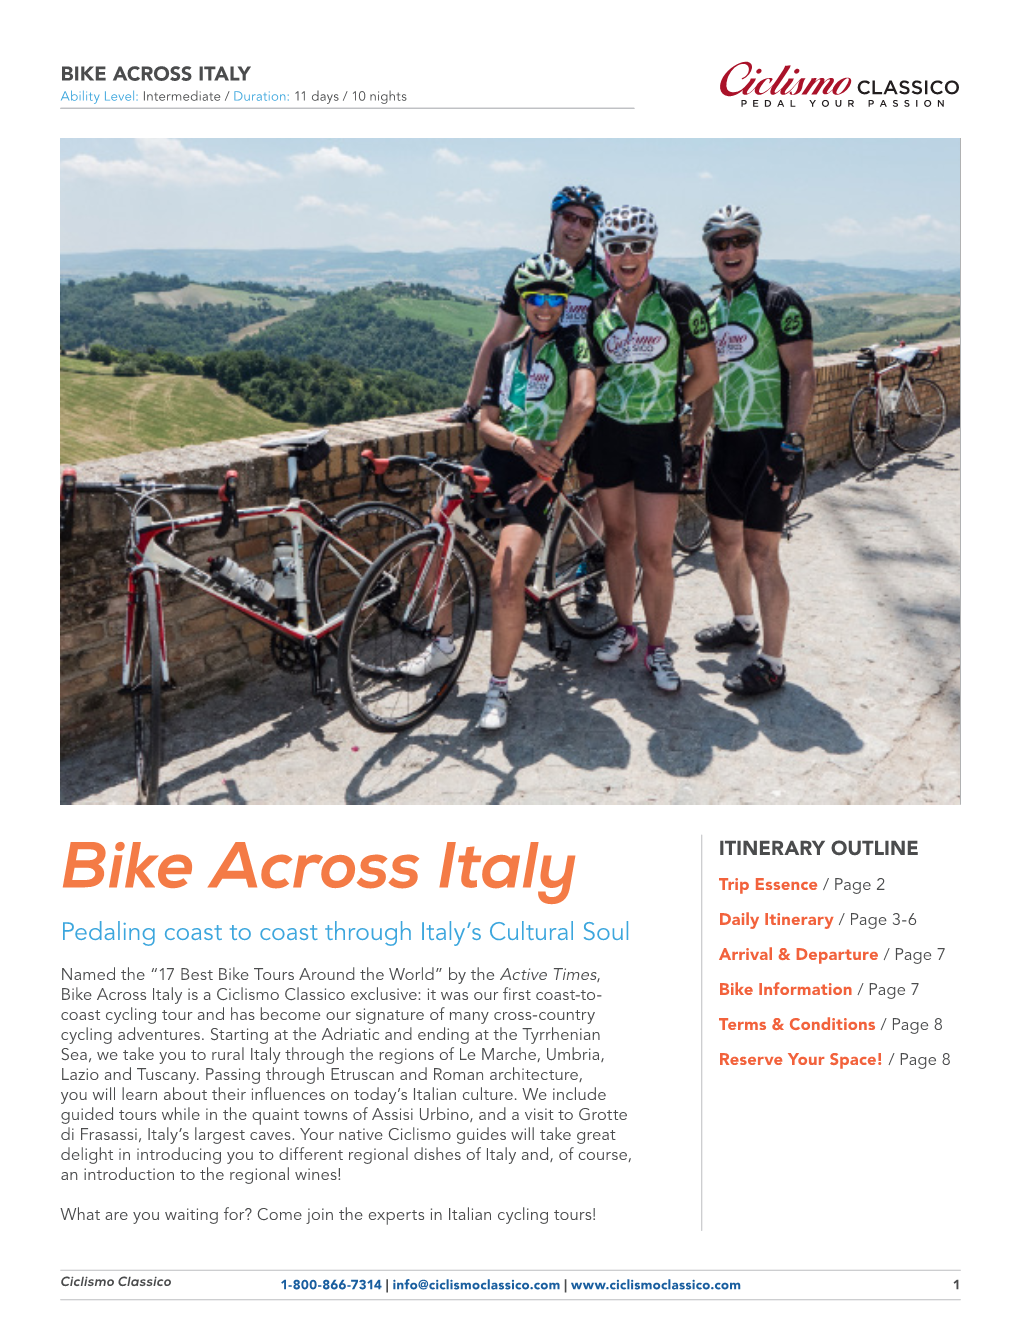 BIKE ACROSS ITALY CLASSICO Ability Level: Intermediate / Duration: 11 Days / 10 Nights PEDAL YOUR PASSION